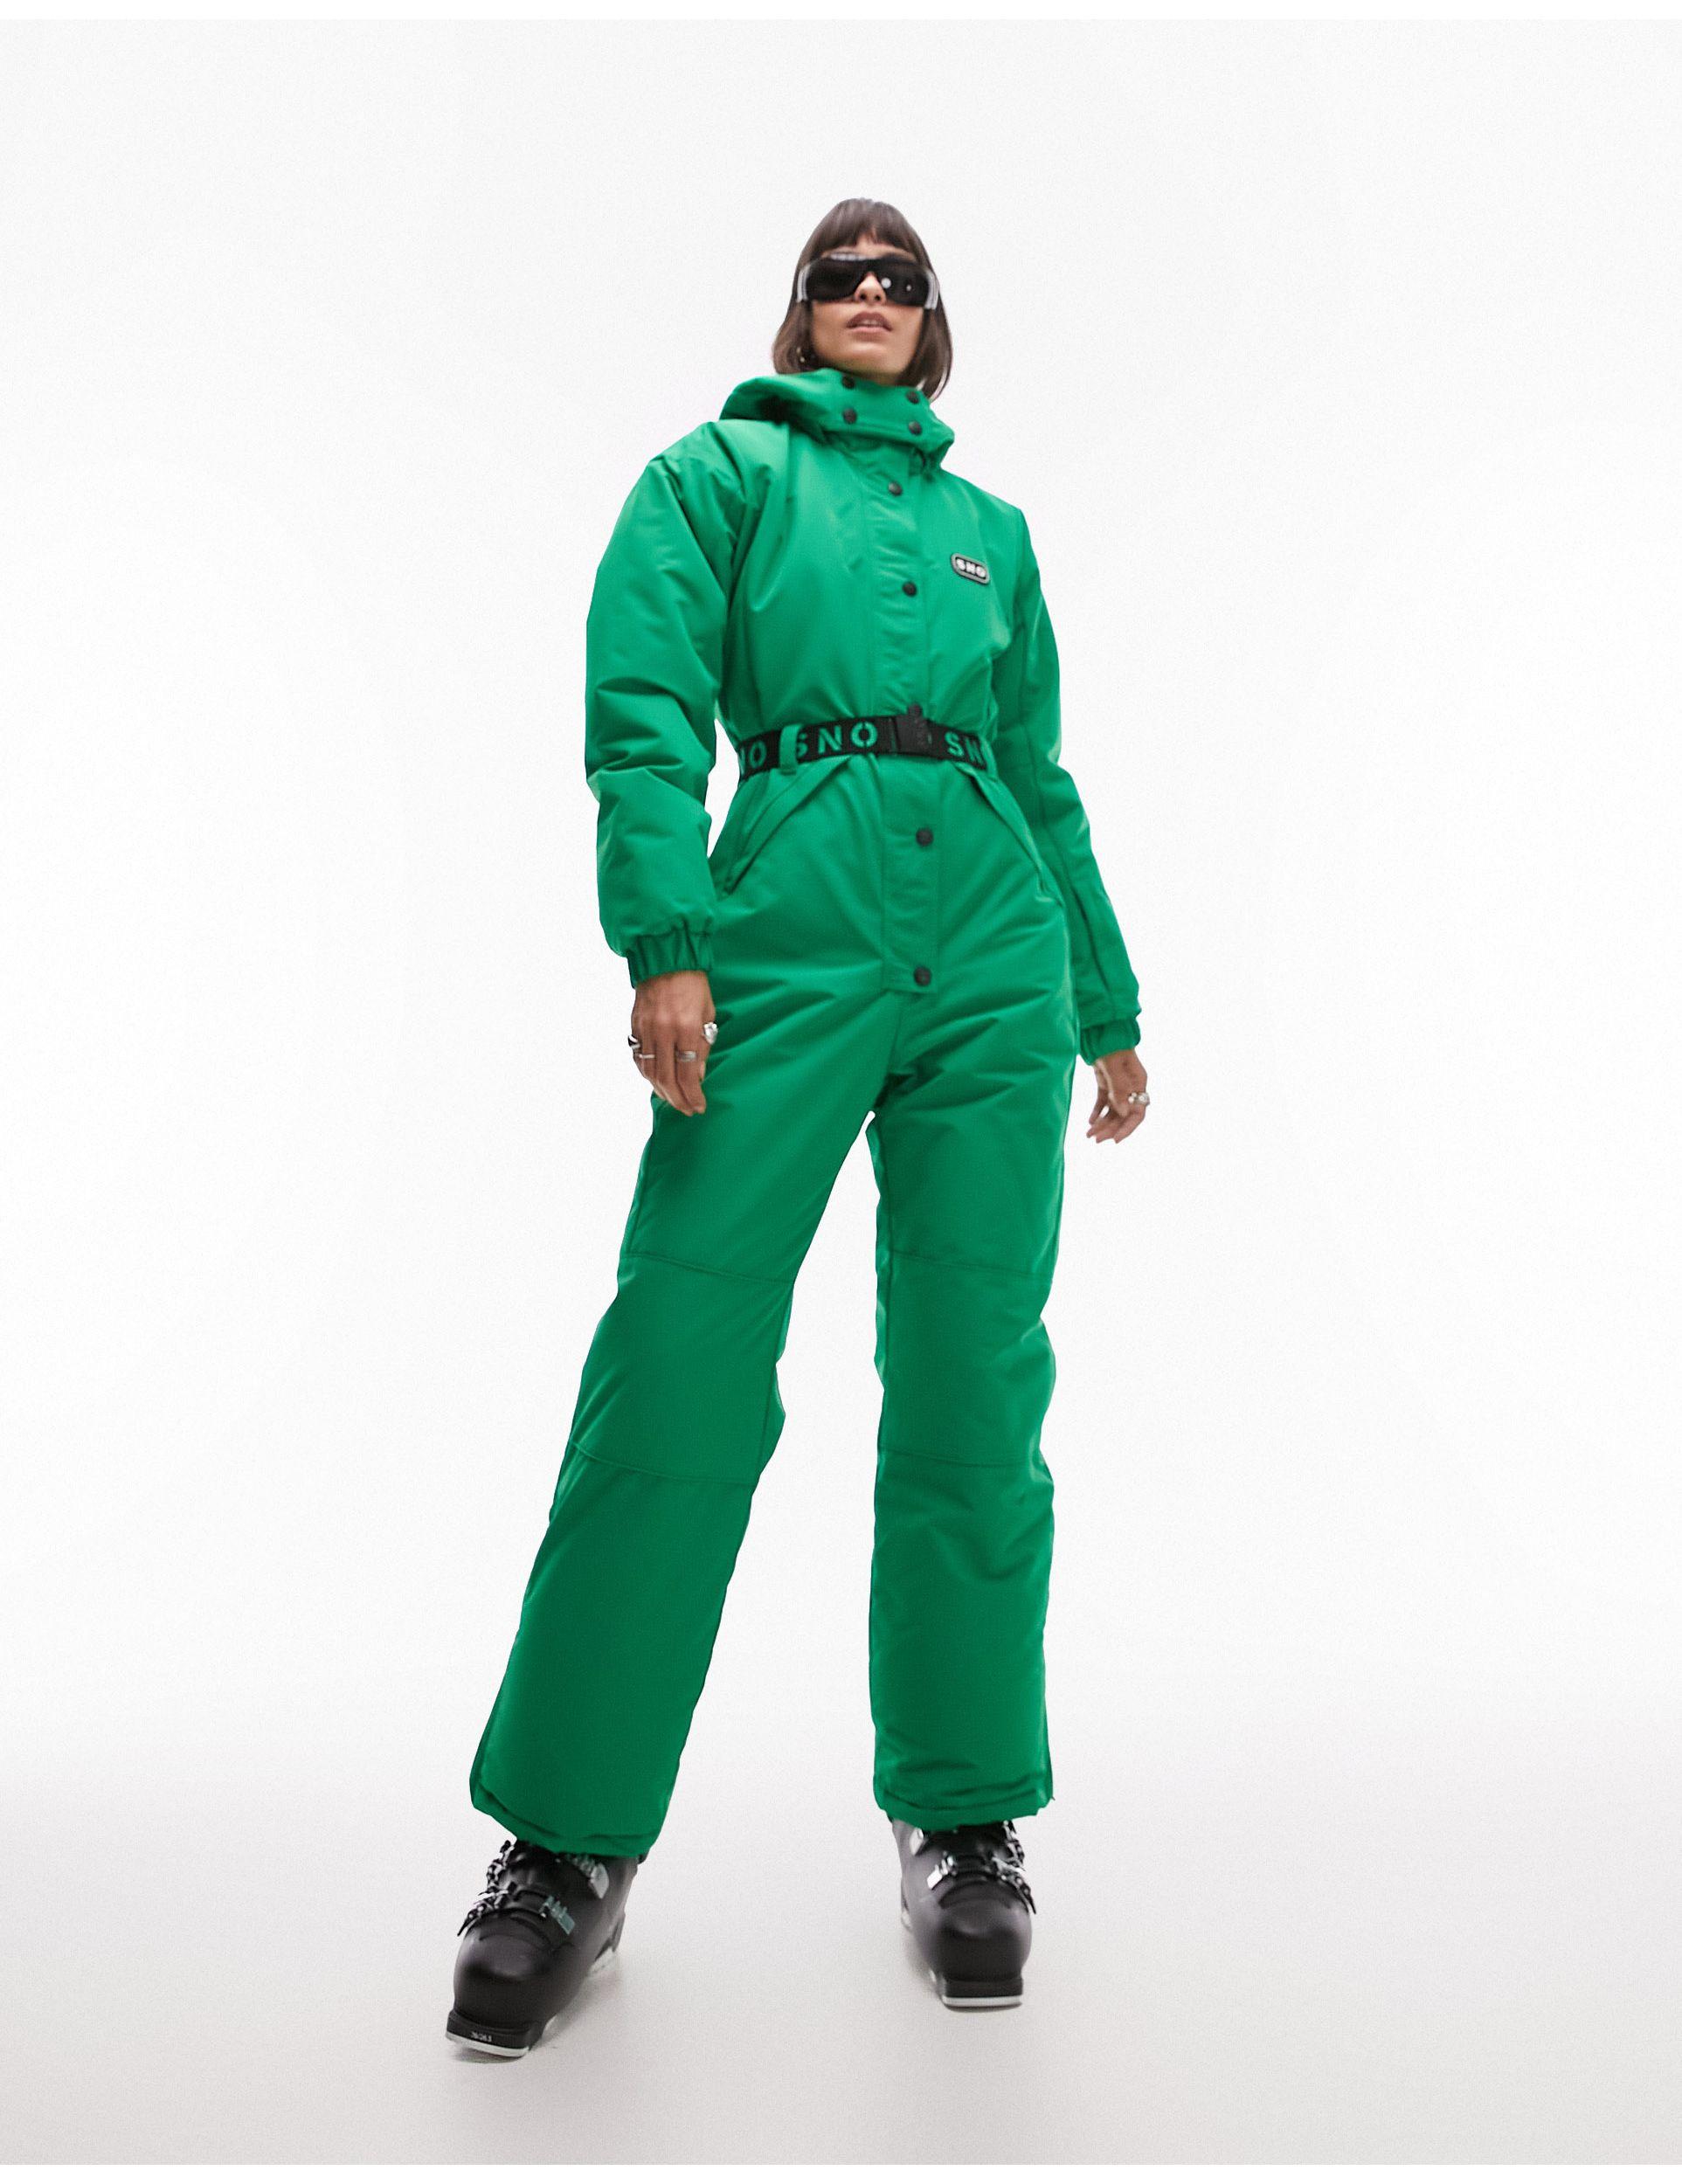 TOPSHOP Sno Ski Suit With Hood And Belt in Green